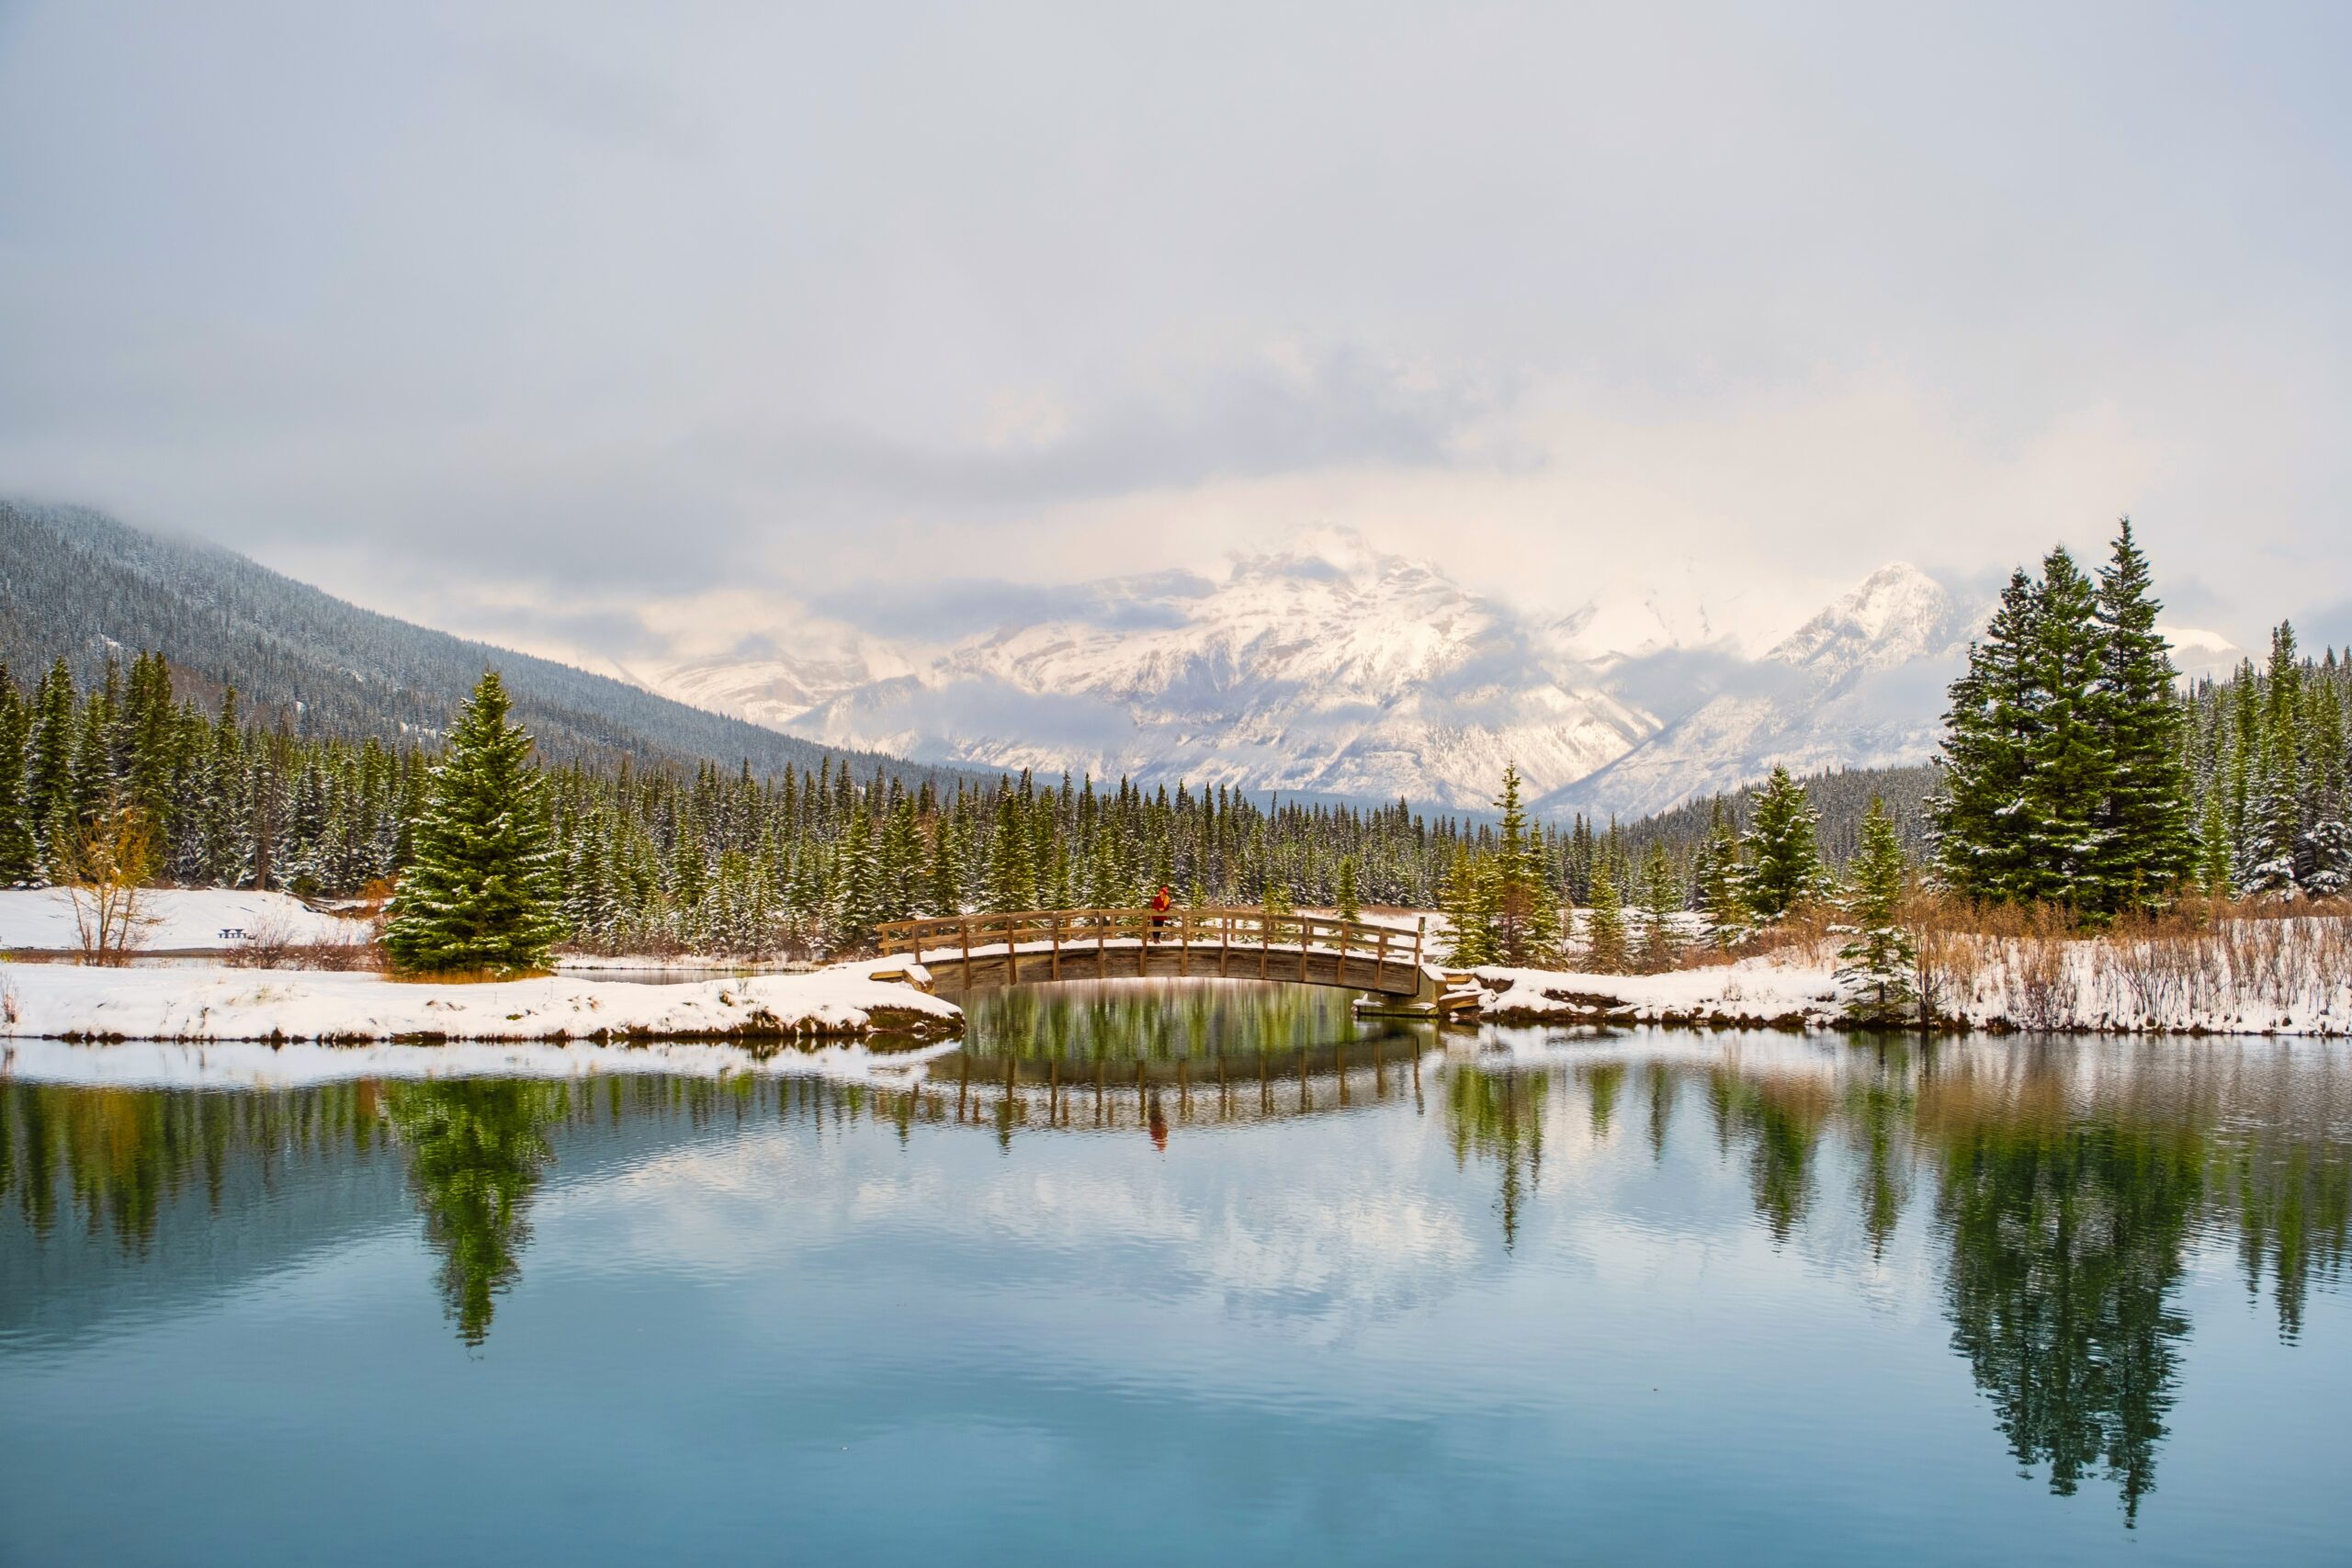 6 Reasons You Should Visit CASCADE PONDS in Banff